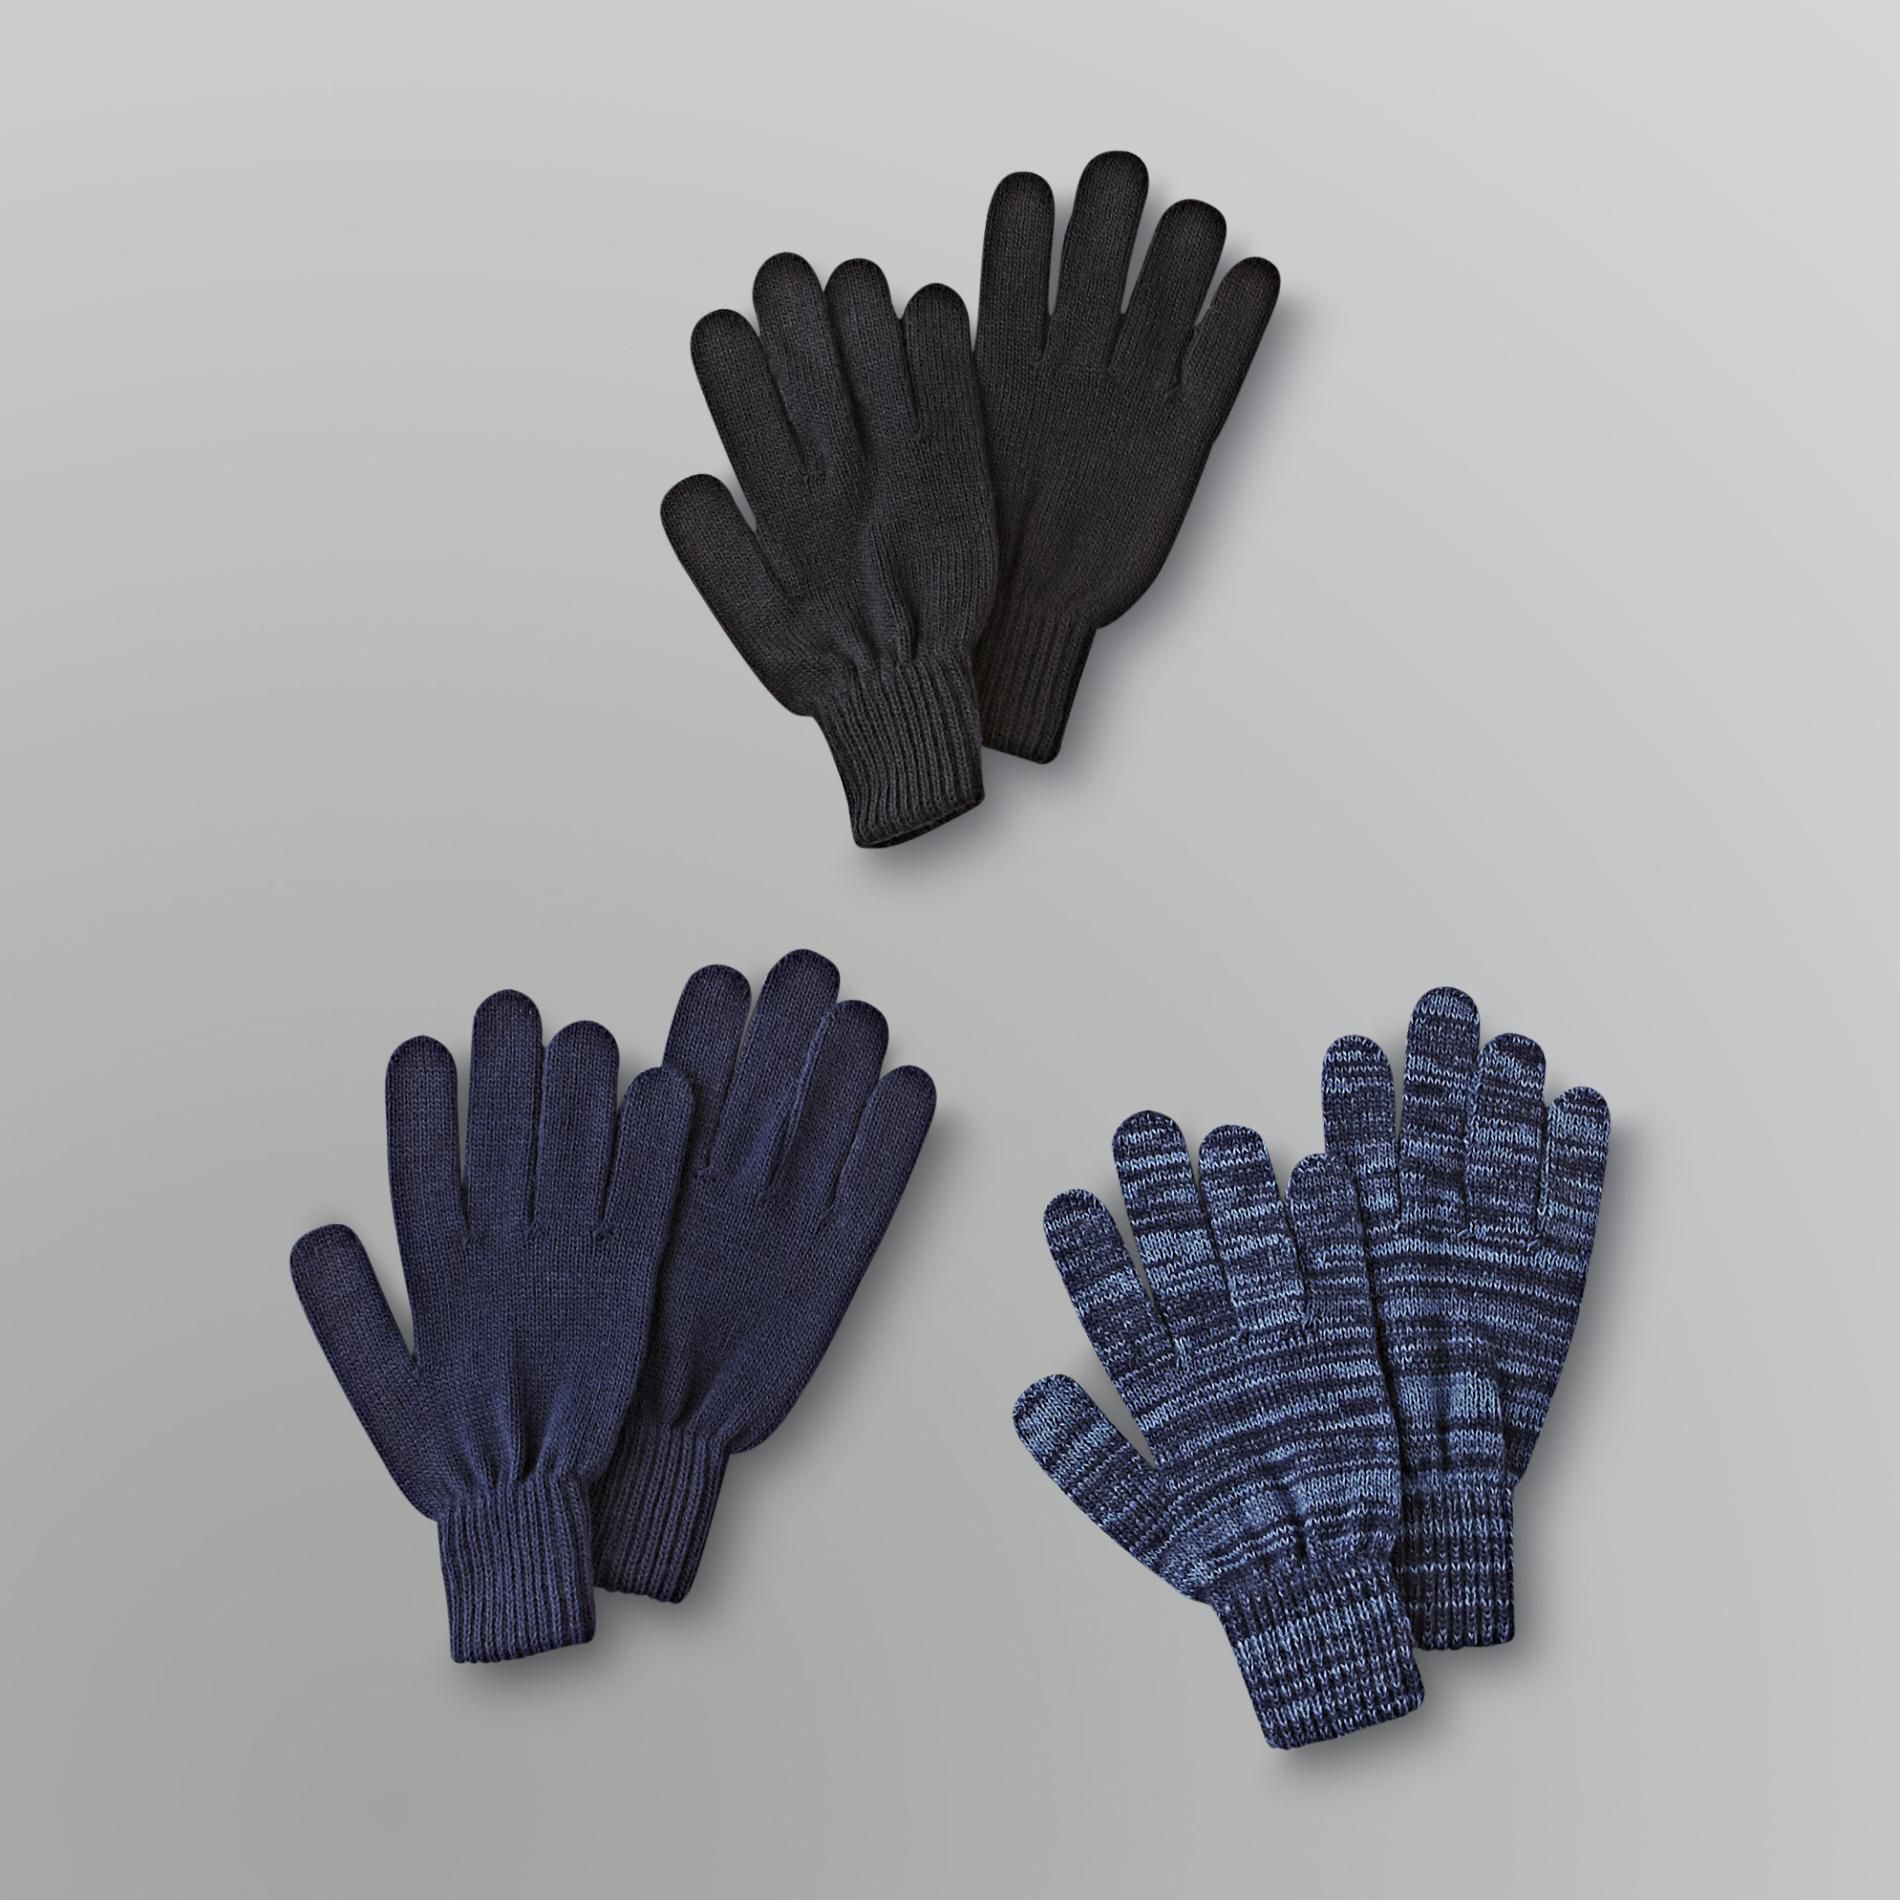 Attention Men's Knit Gloves - 3-Pairs